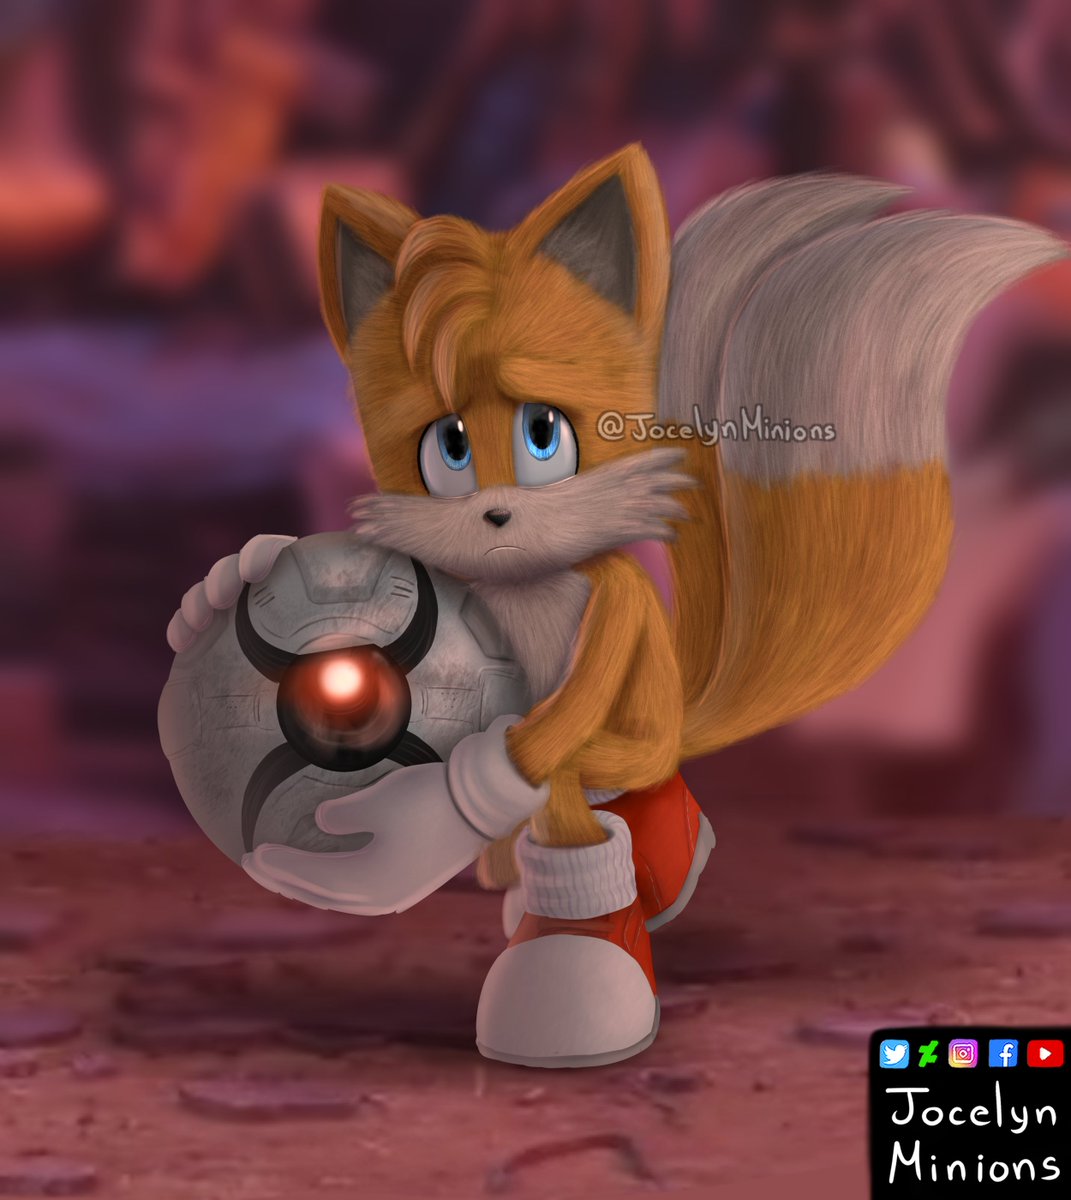 Sonic Movie 1 and 2 by JocelynMinions on DeviantArt